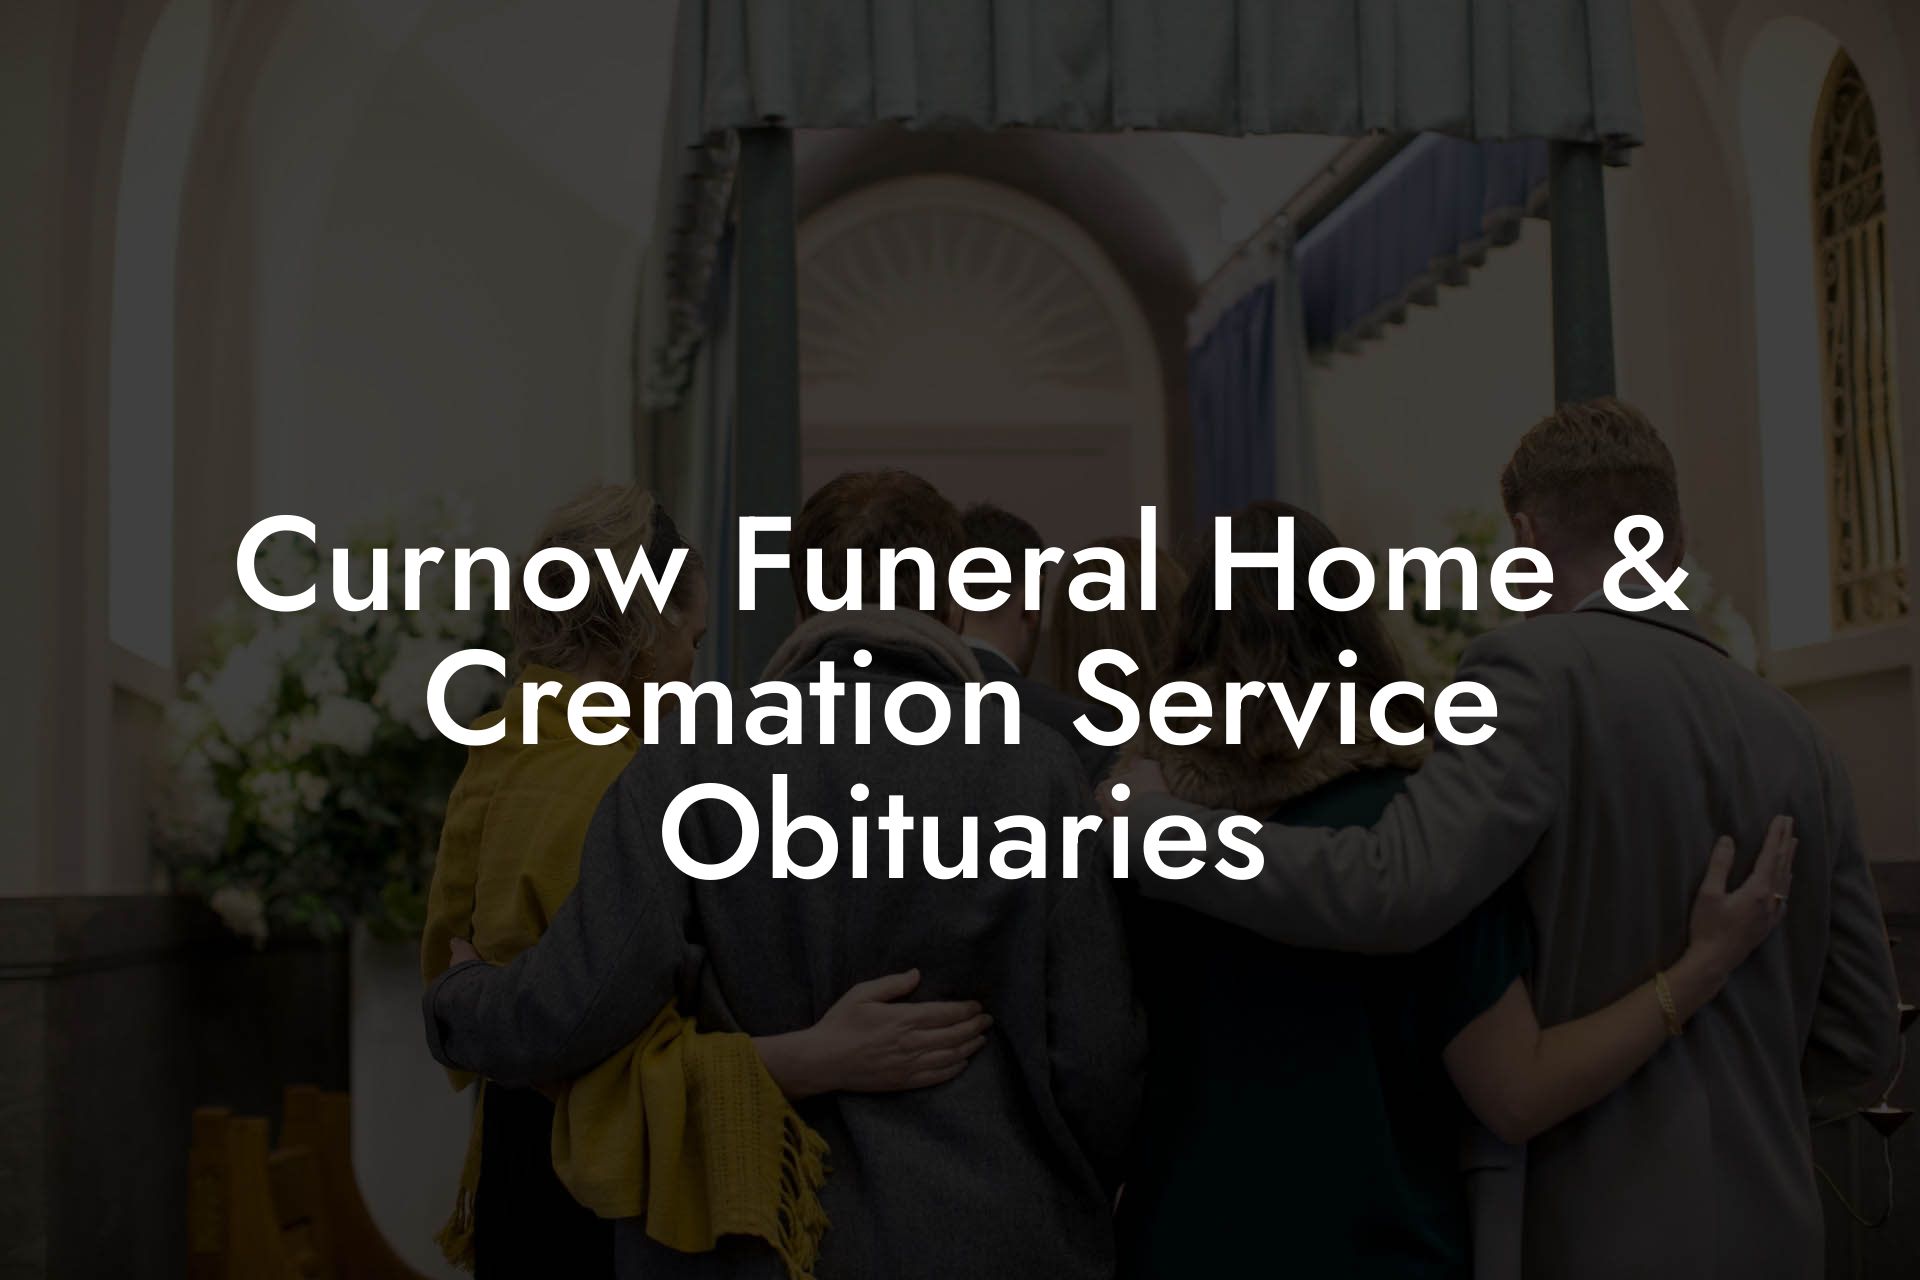 Curnow Funeral Home & Cremation Service Obituaries